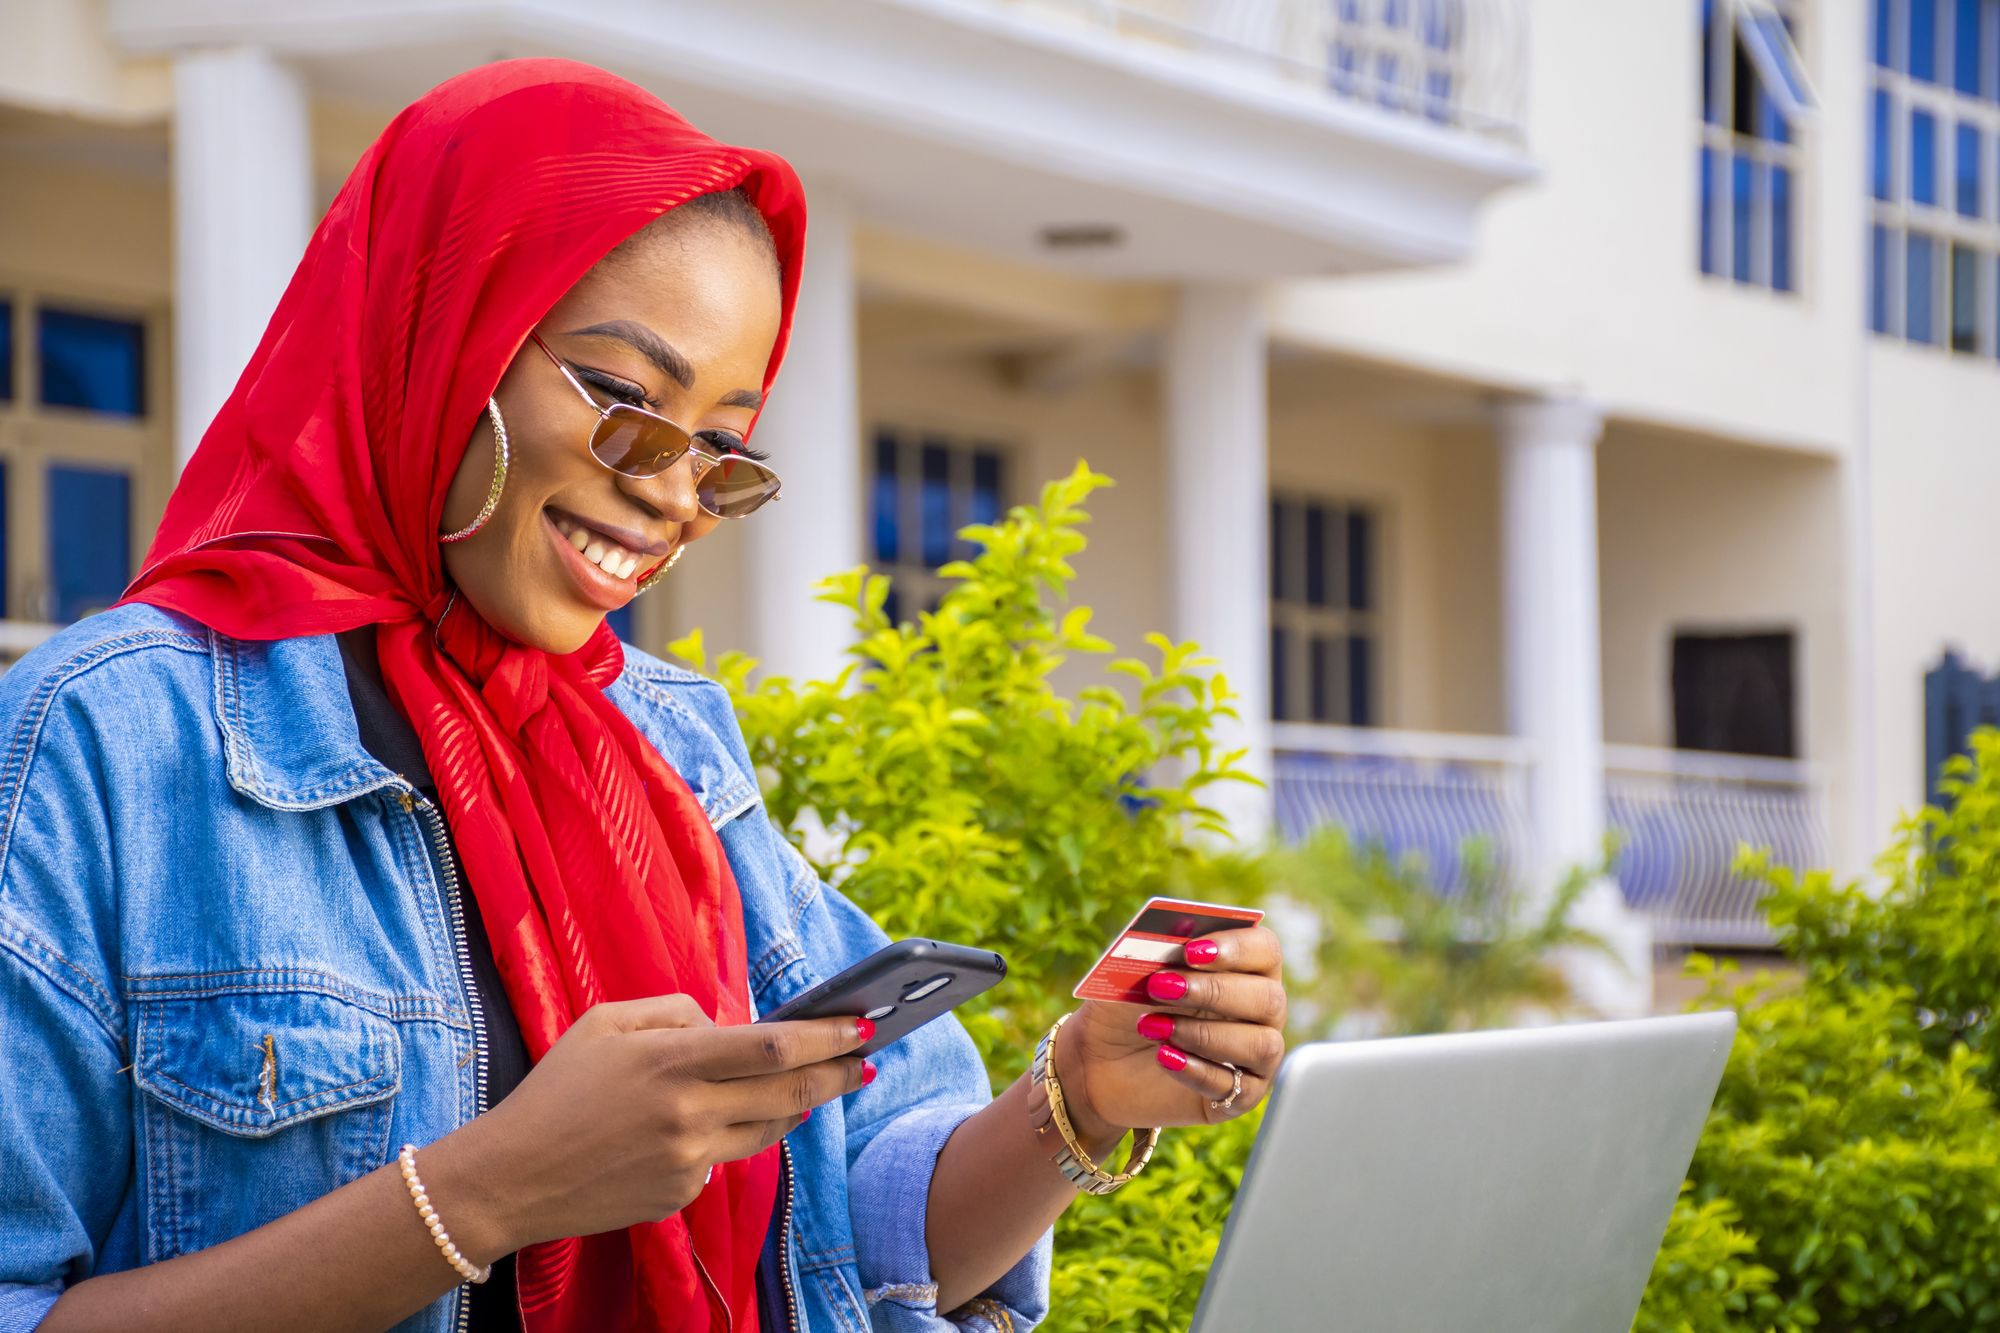 A young woman smiling and holding a mobile phone and an atm card 